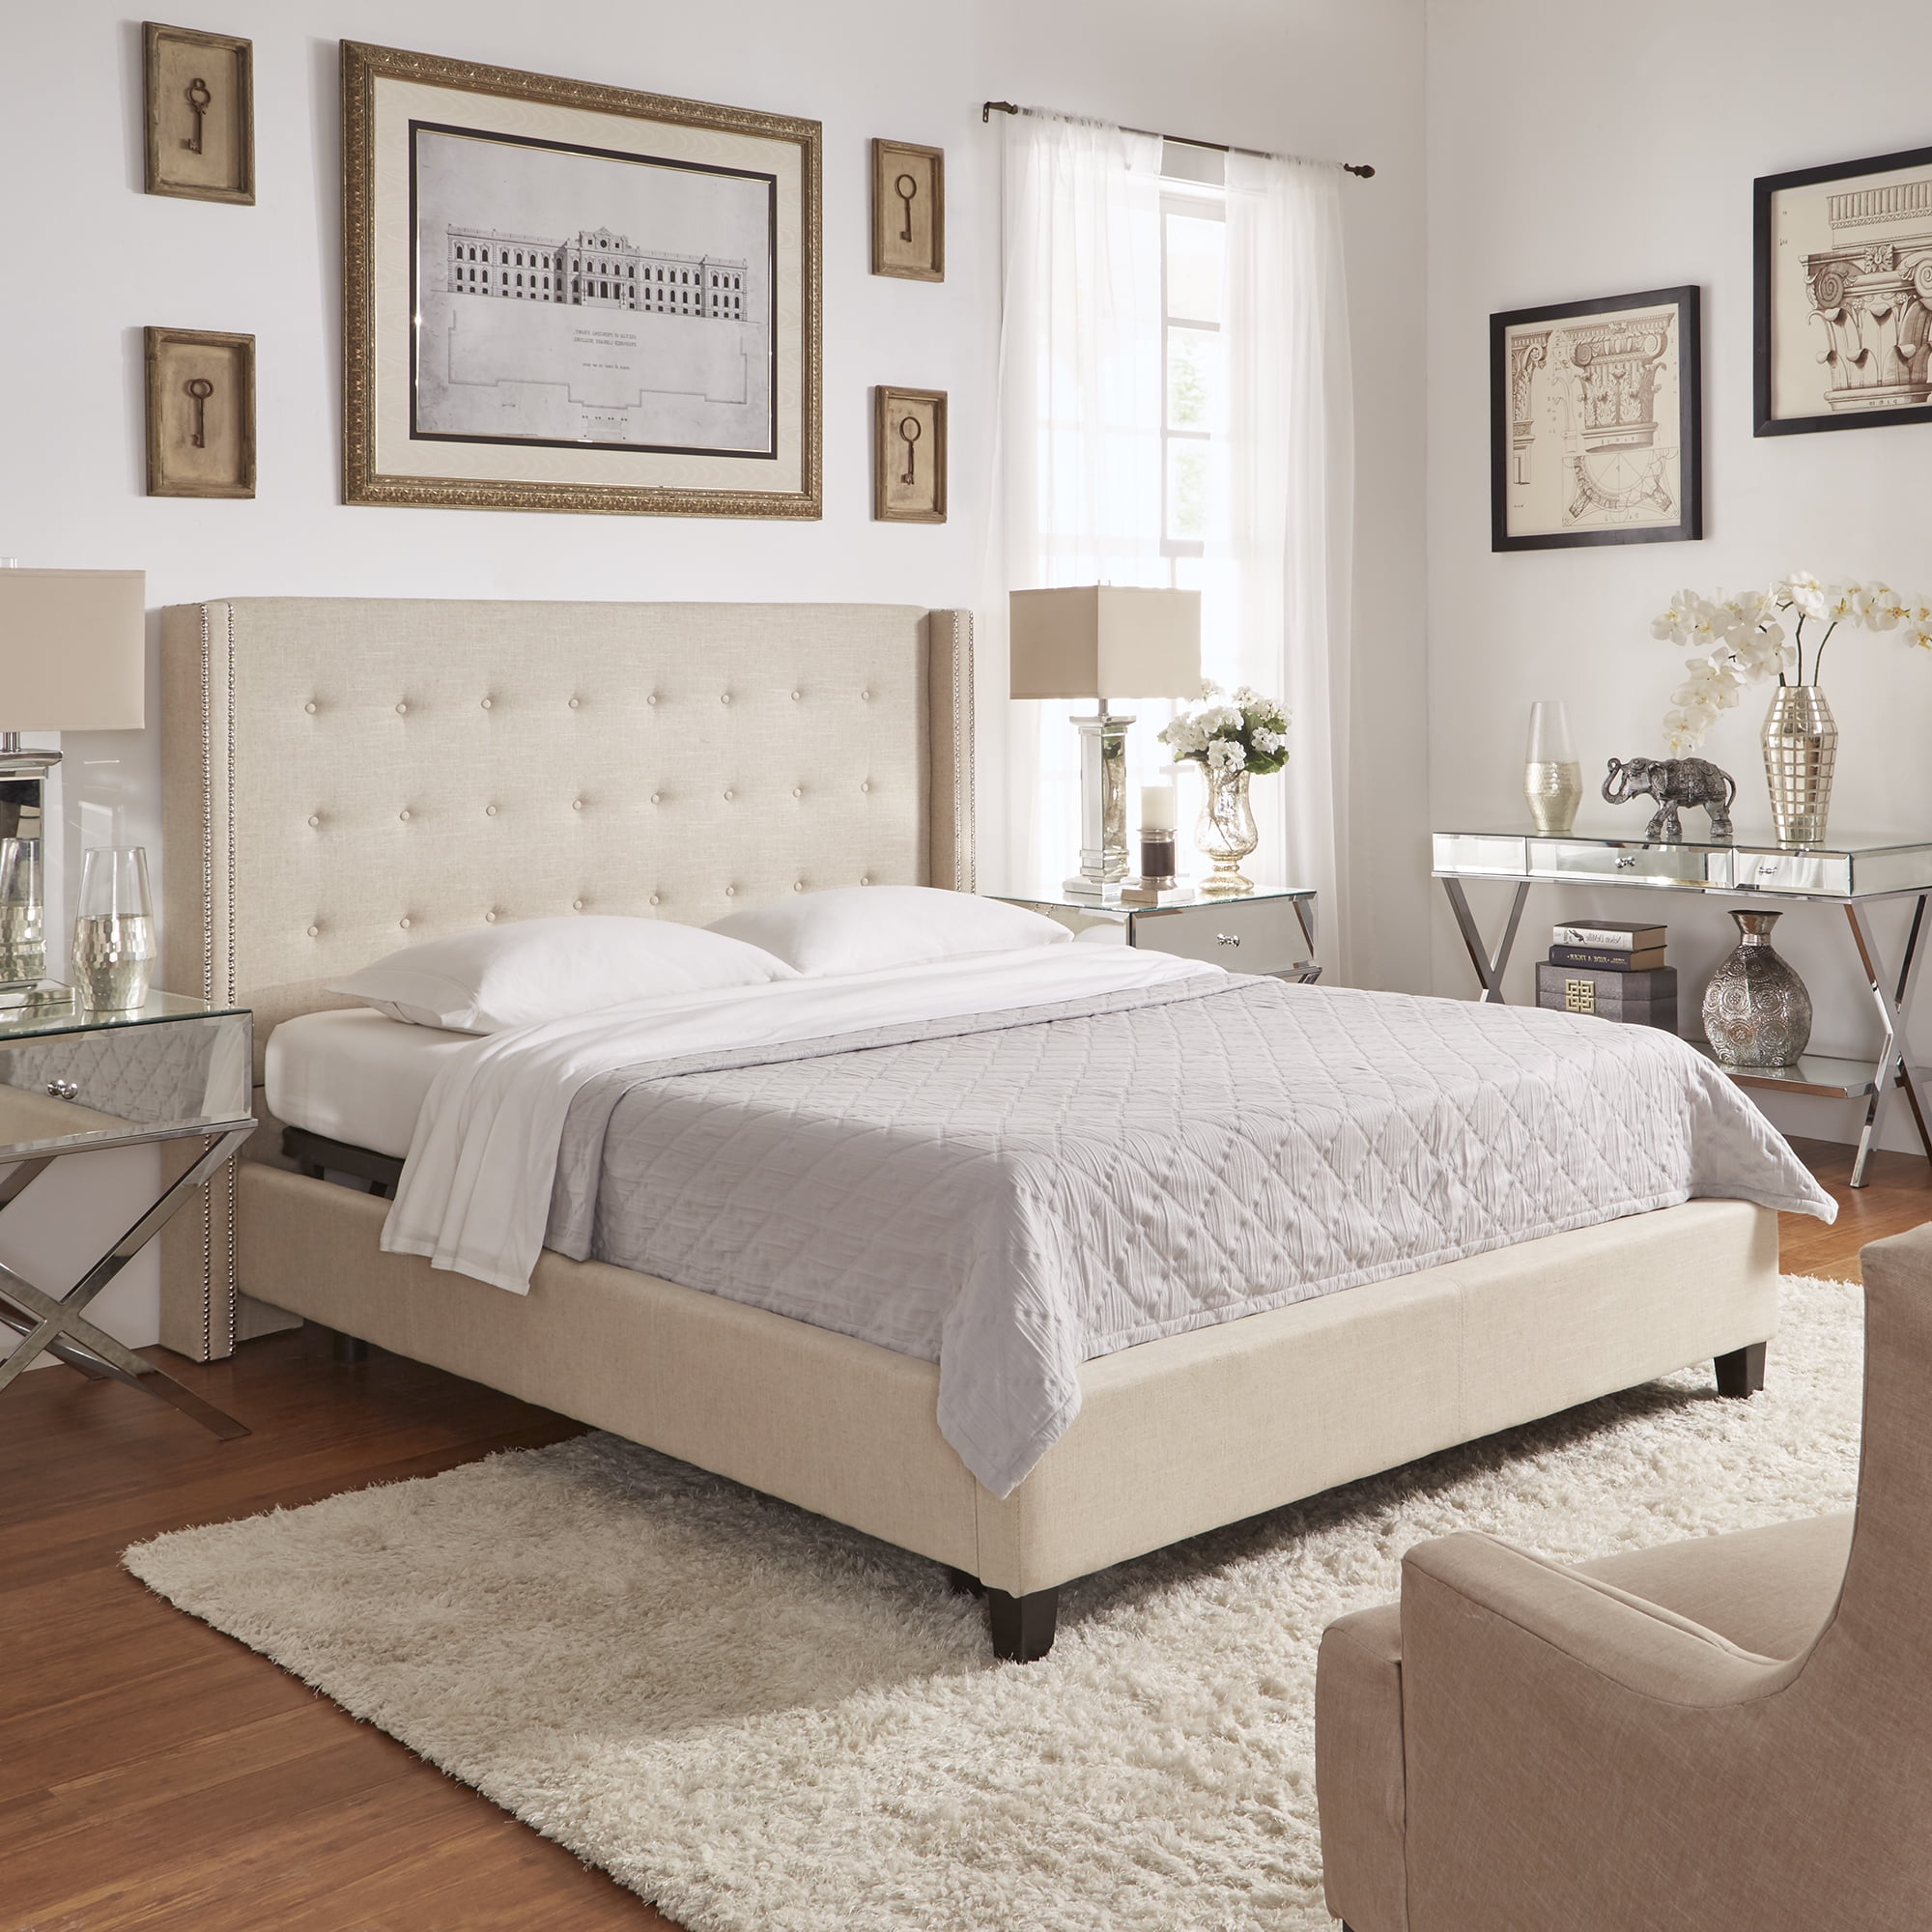 Weston Home Curtis I Upholstered Queen Bed with Wingback Nailhead